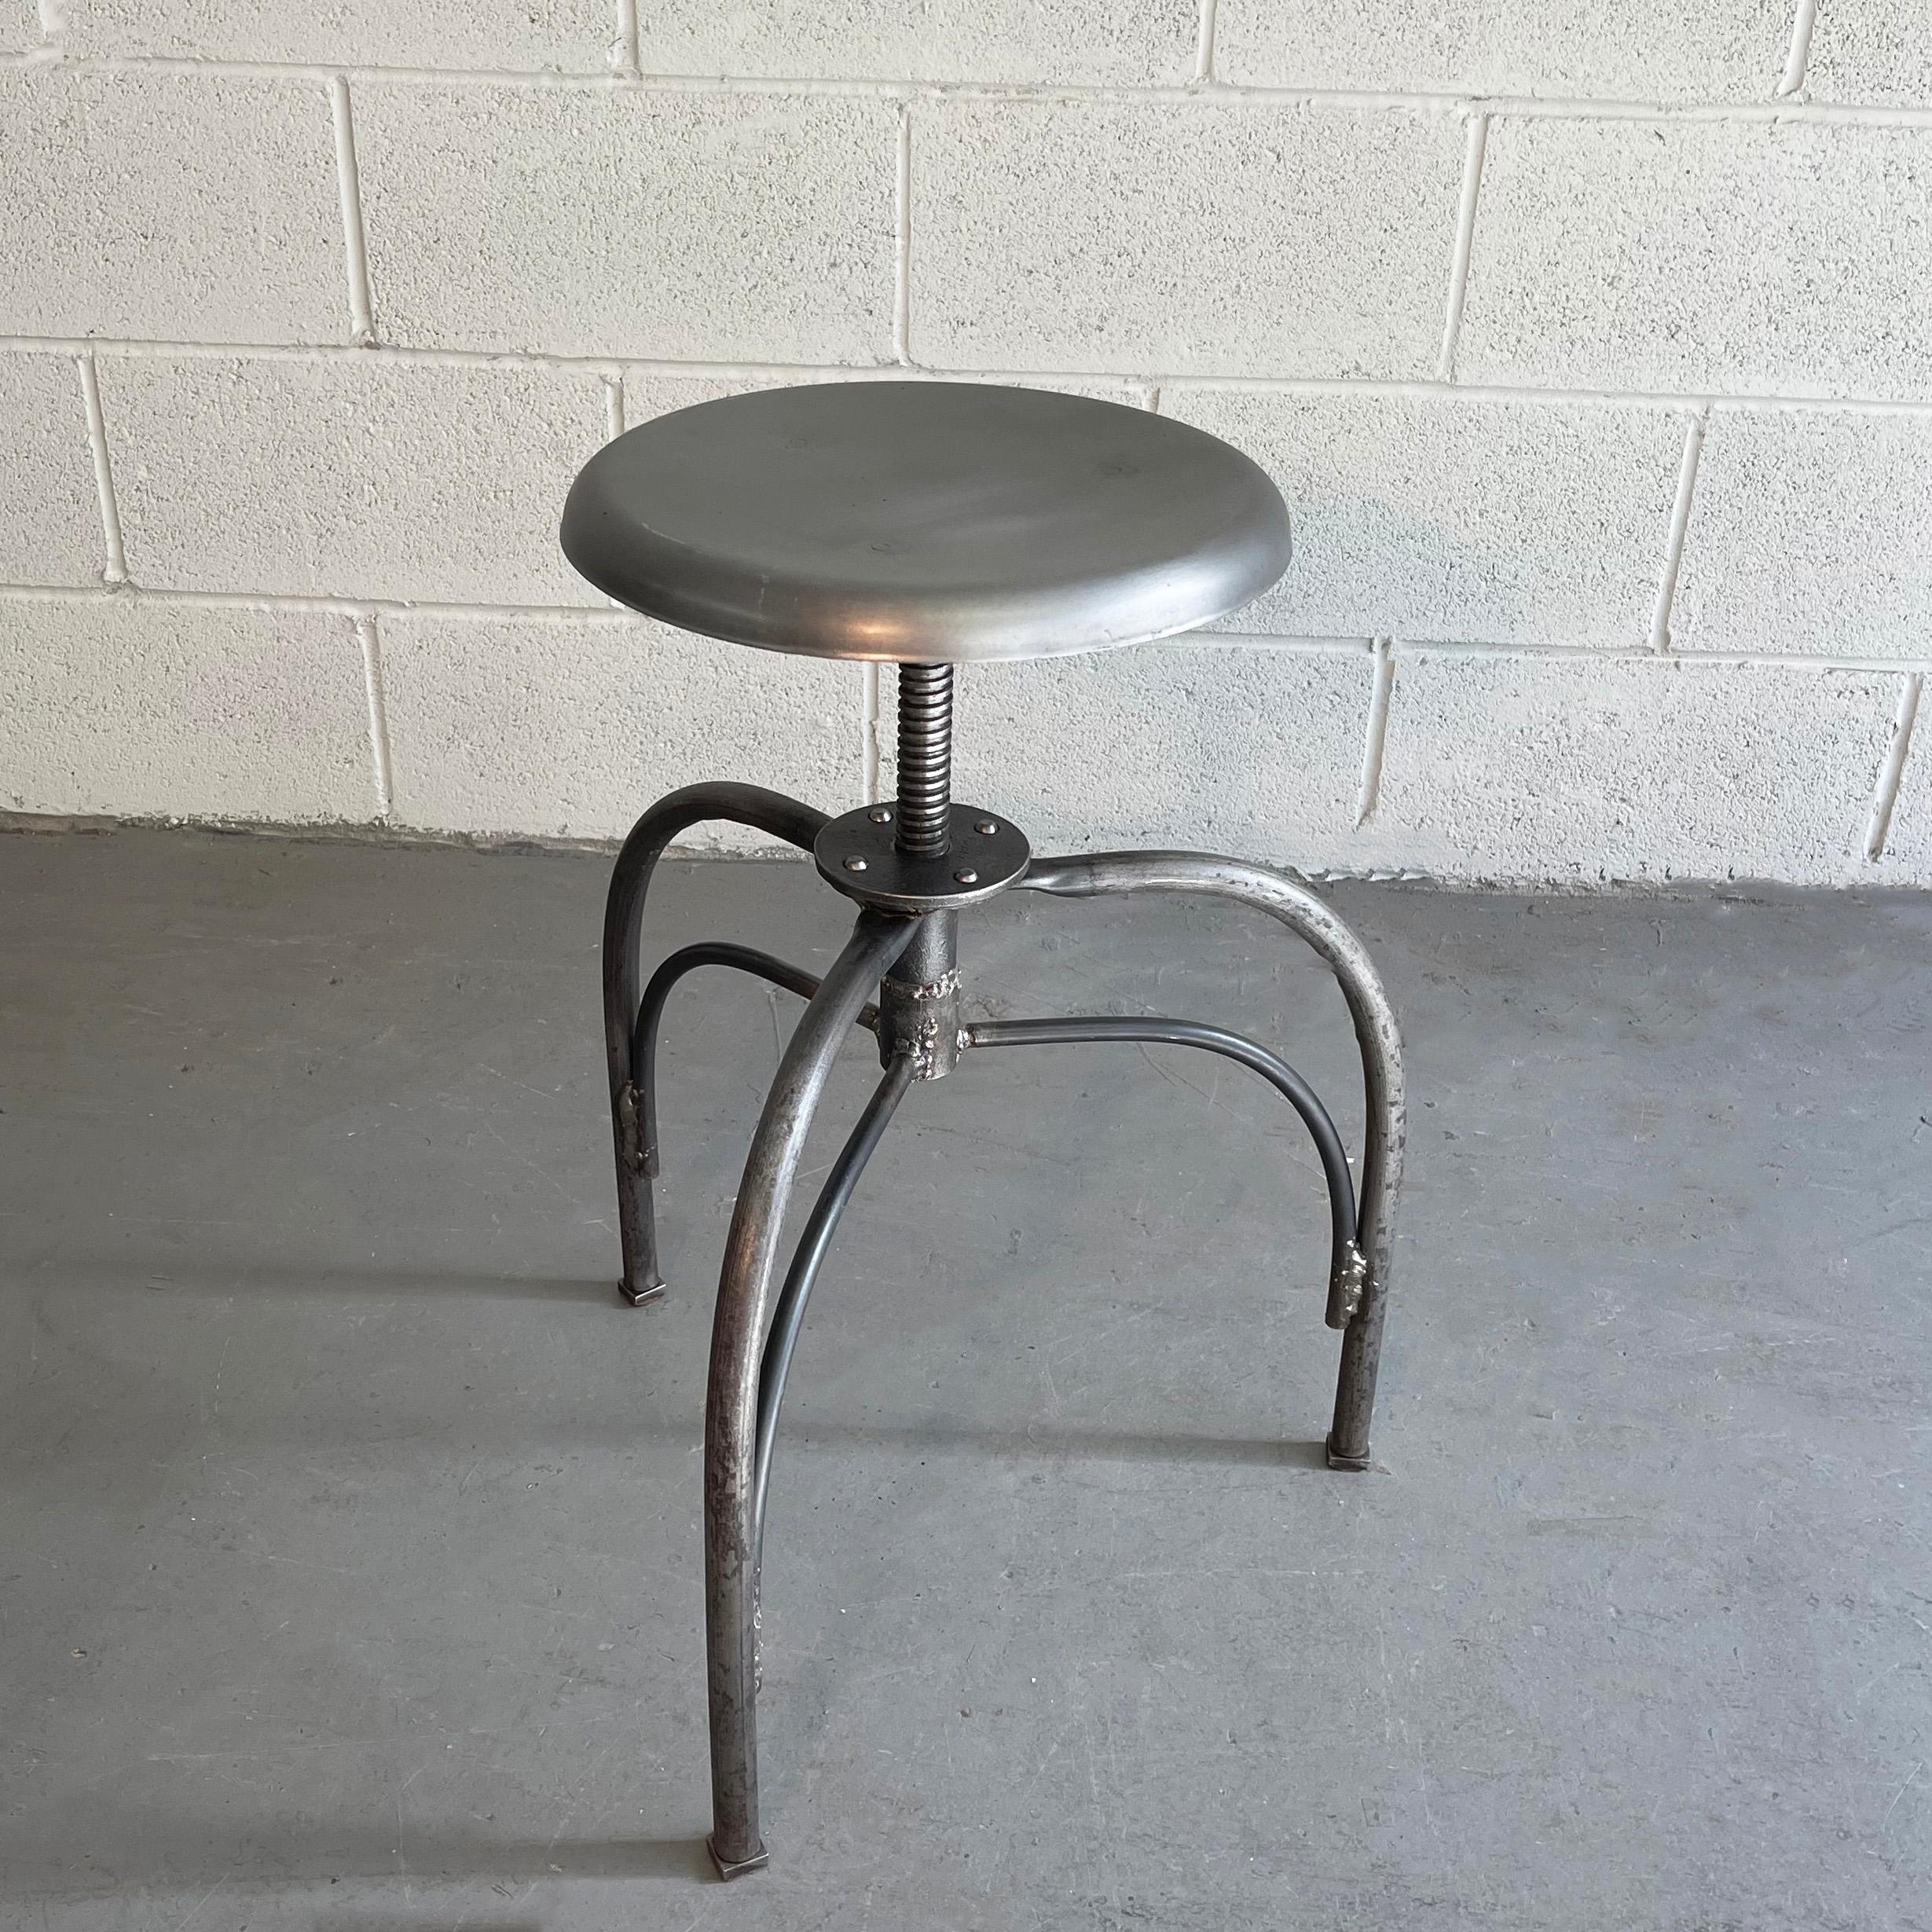 Early 20th century, industrial, brushed steel, hospital, examination stool features a 14 inch diameter, swivel seat that is height adjustable from 18 - 24 inches.